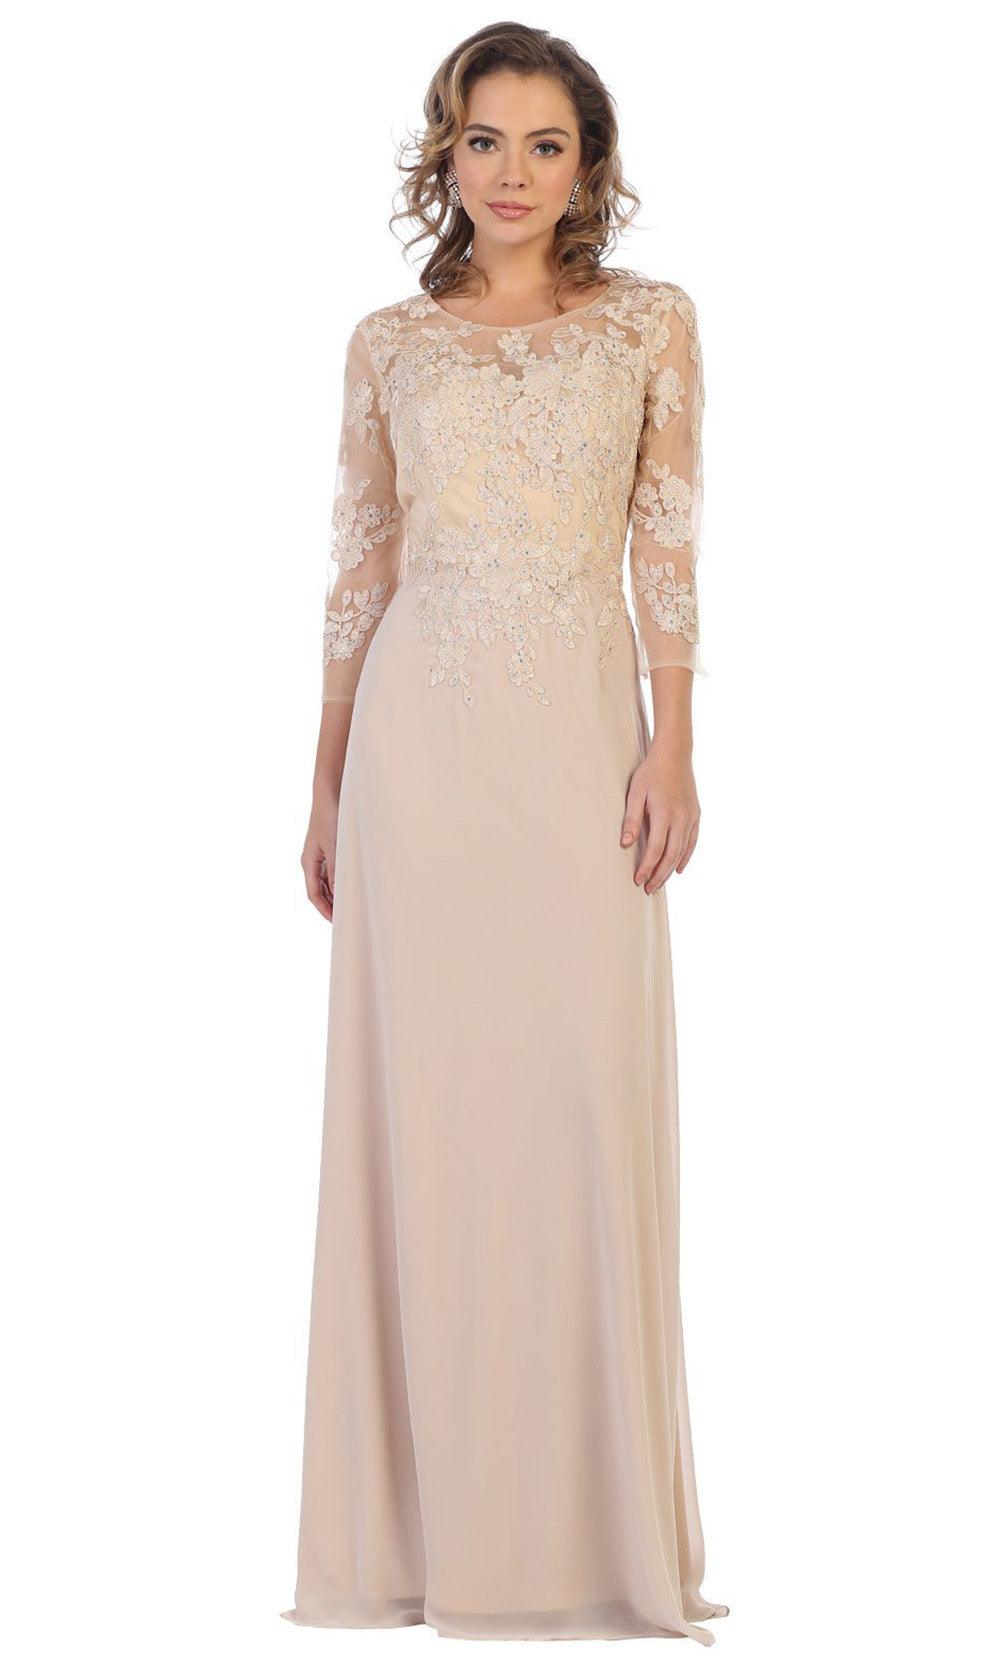 May Queen - MQ1637 Illusion Quarter Sleeve Long Dress In Champagne